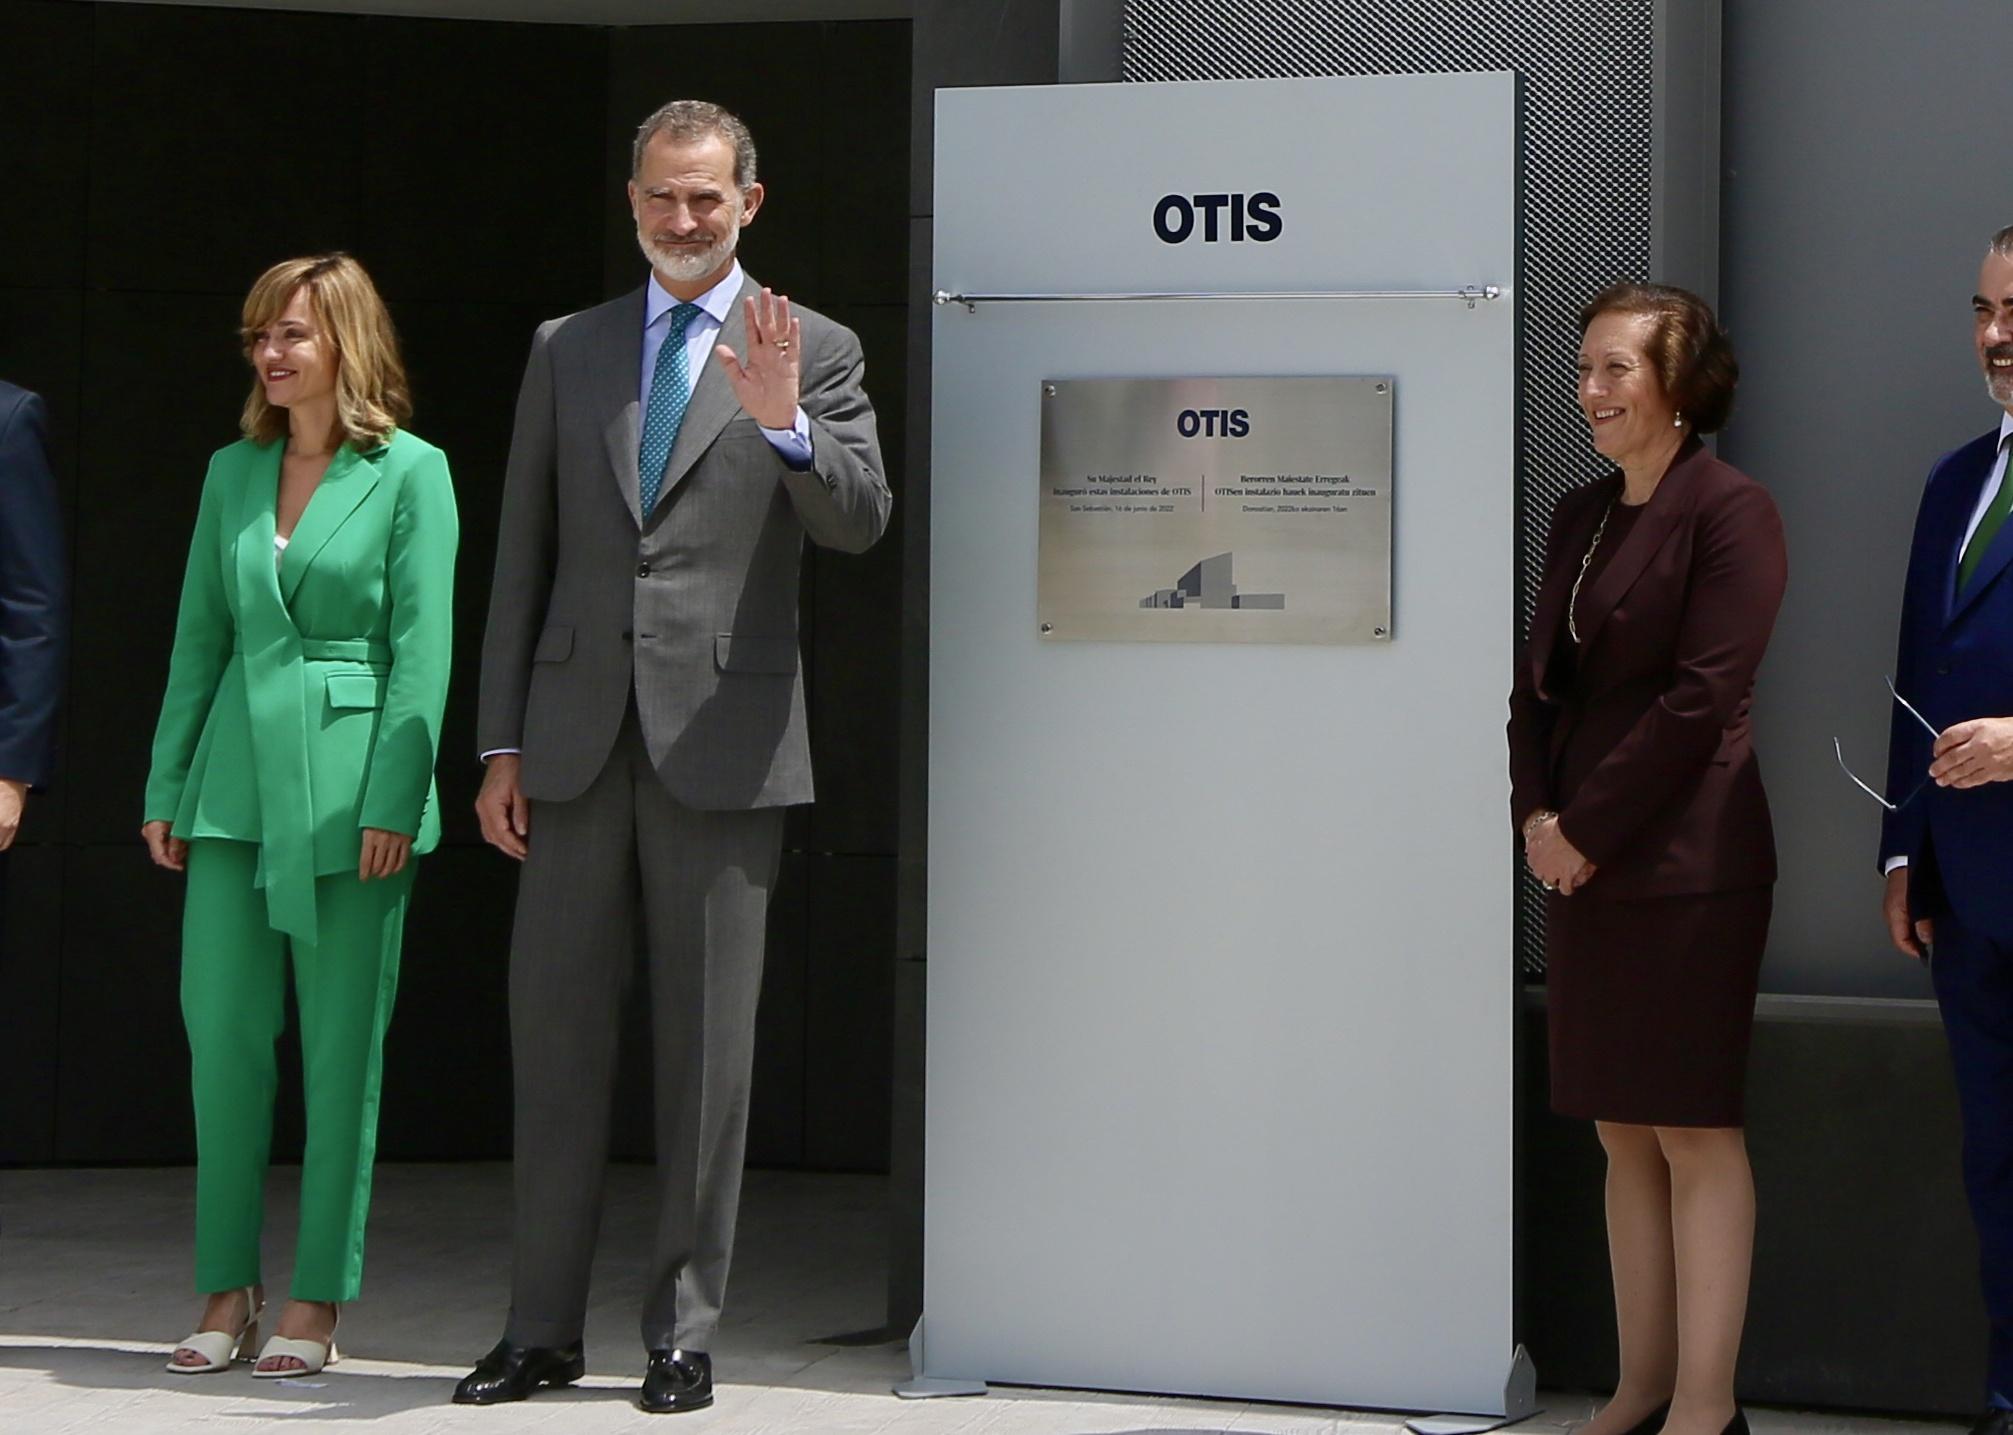 The Minister of Education and Vocational Training, Pilar Alegria; King Felipe VI and OTIS Worldwide CEO Judy Marks pose next to the inauguration plaque of a new OTIS factory.